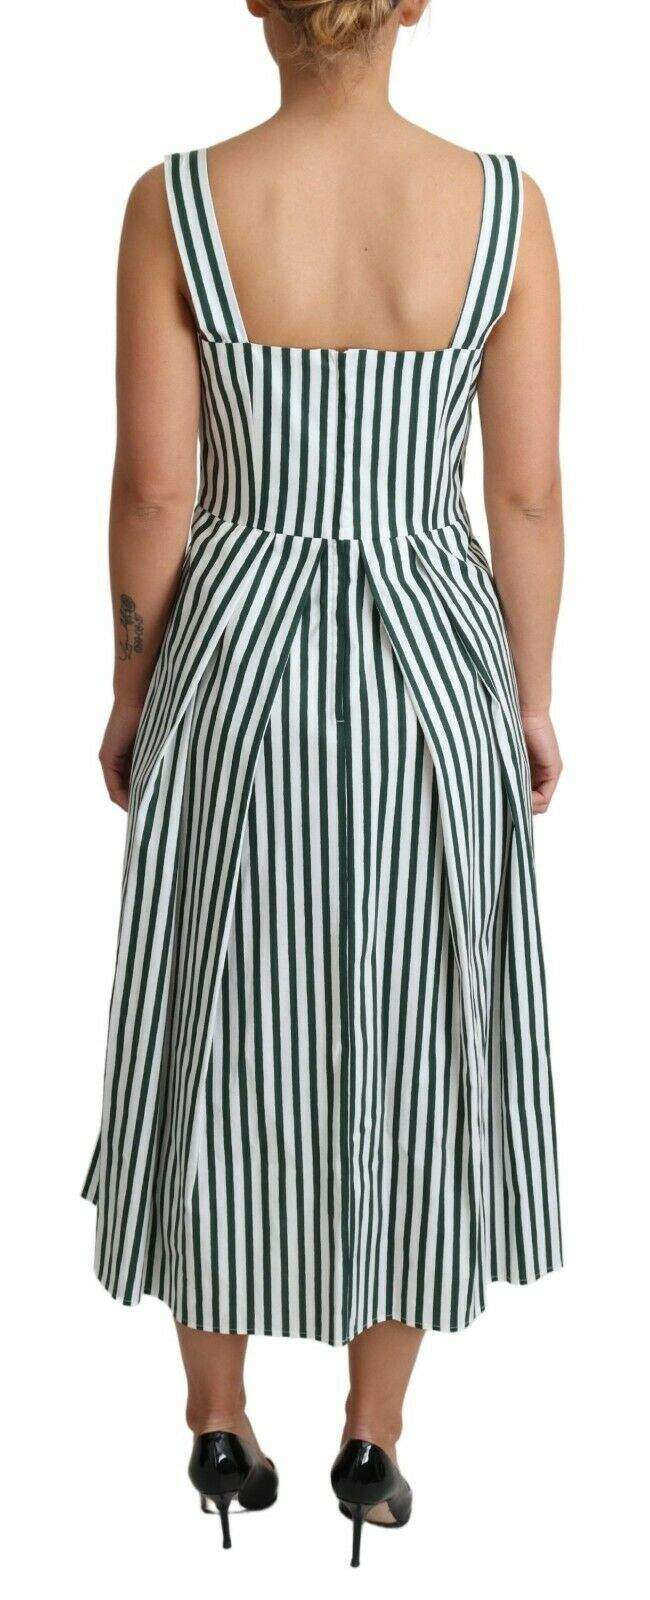 Dolce & Gabbana Green Striped Cotton A-Line Dress Dolce & Gabbana, Dresses - Women - Clothing, feed-agegroup-adult, feed-color-White, feed-gender-female, IT38|XS, IT40|S, IT42|M, IT44|L, White at SEYMAYKA